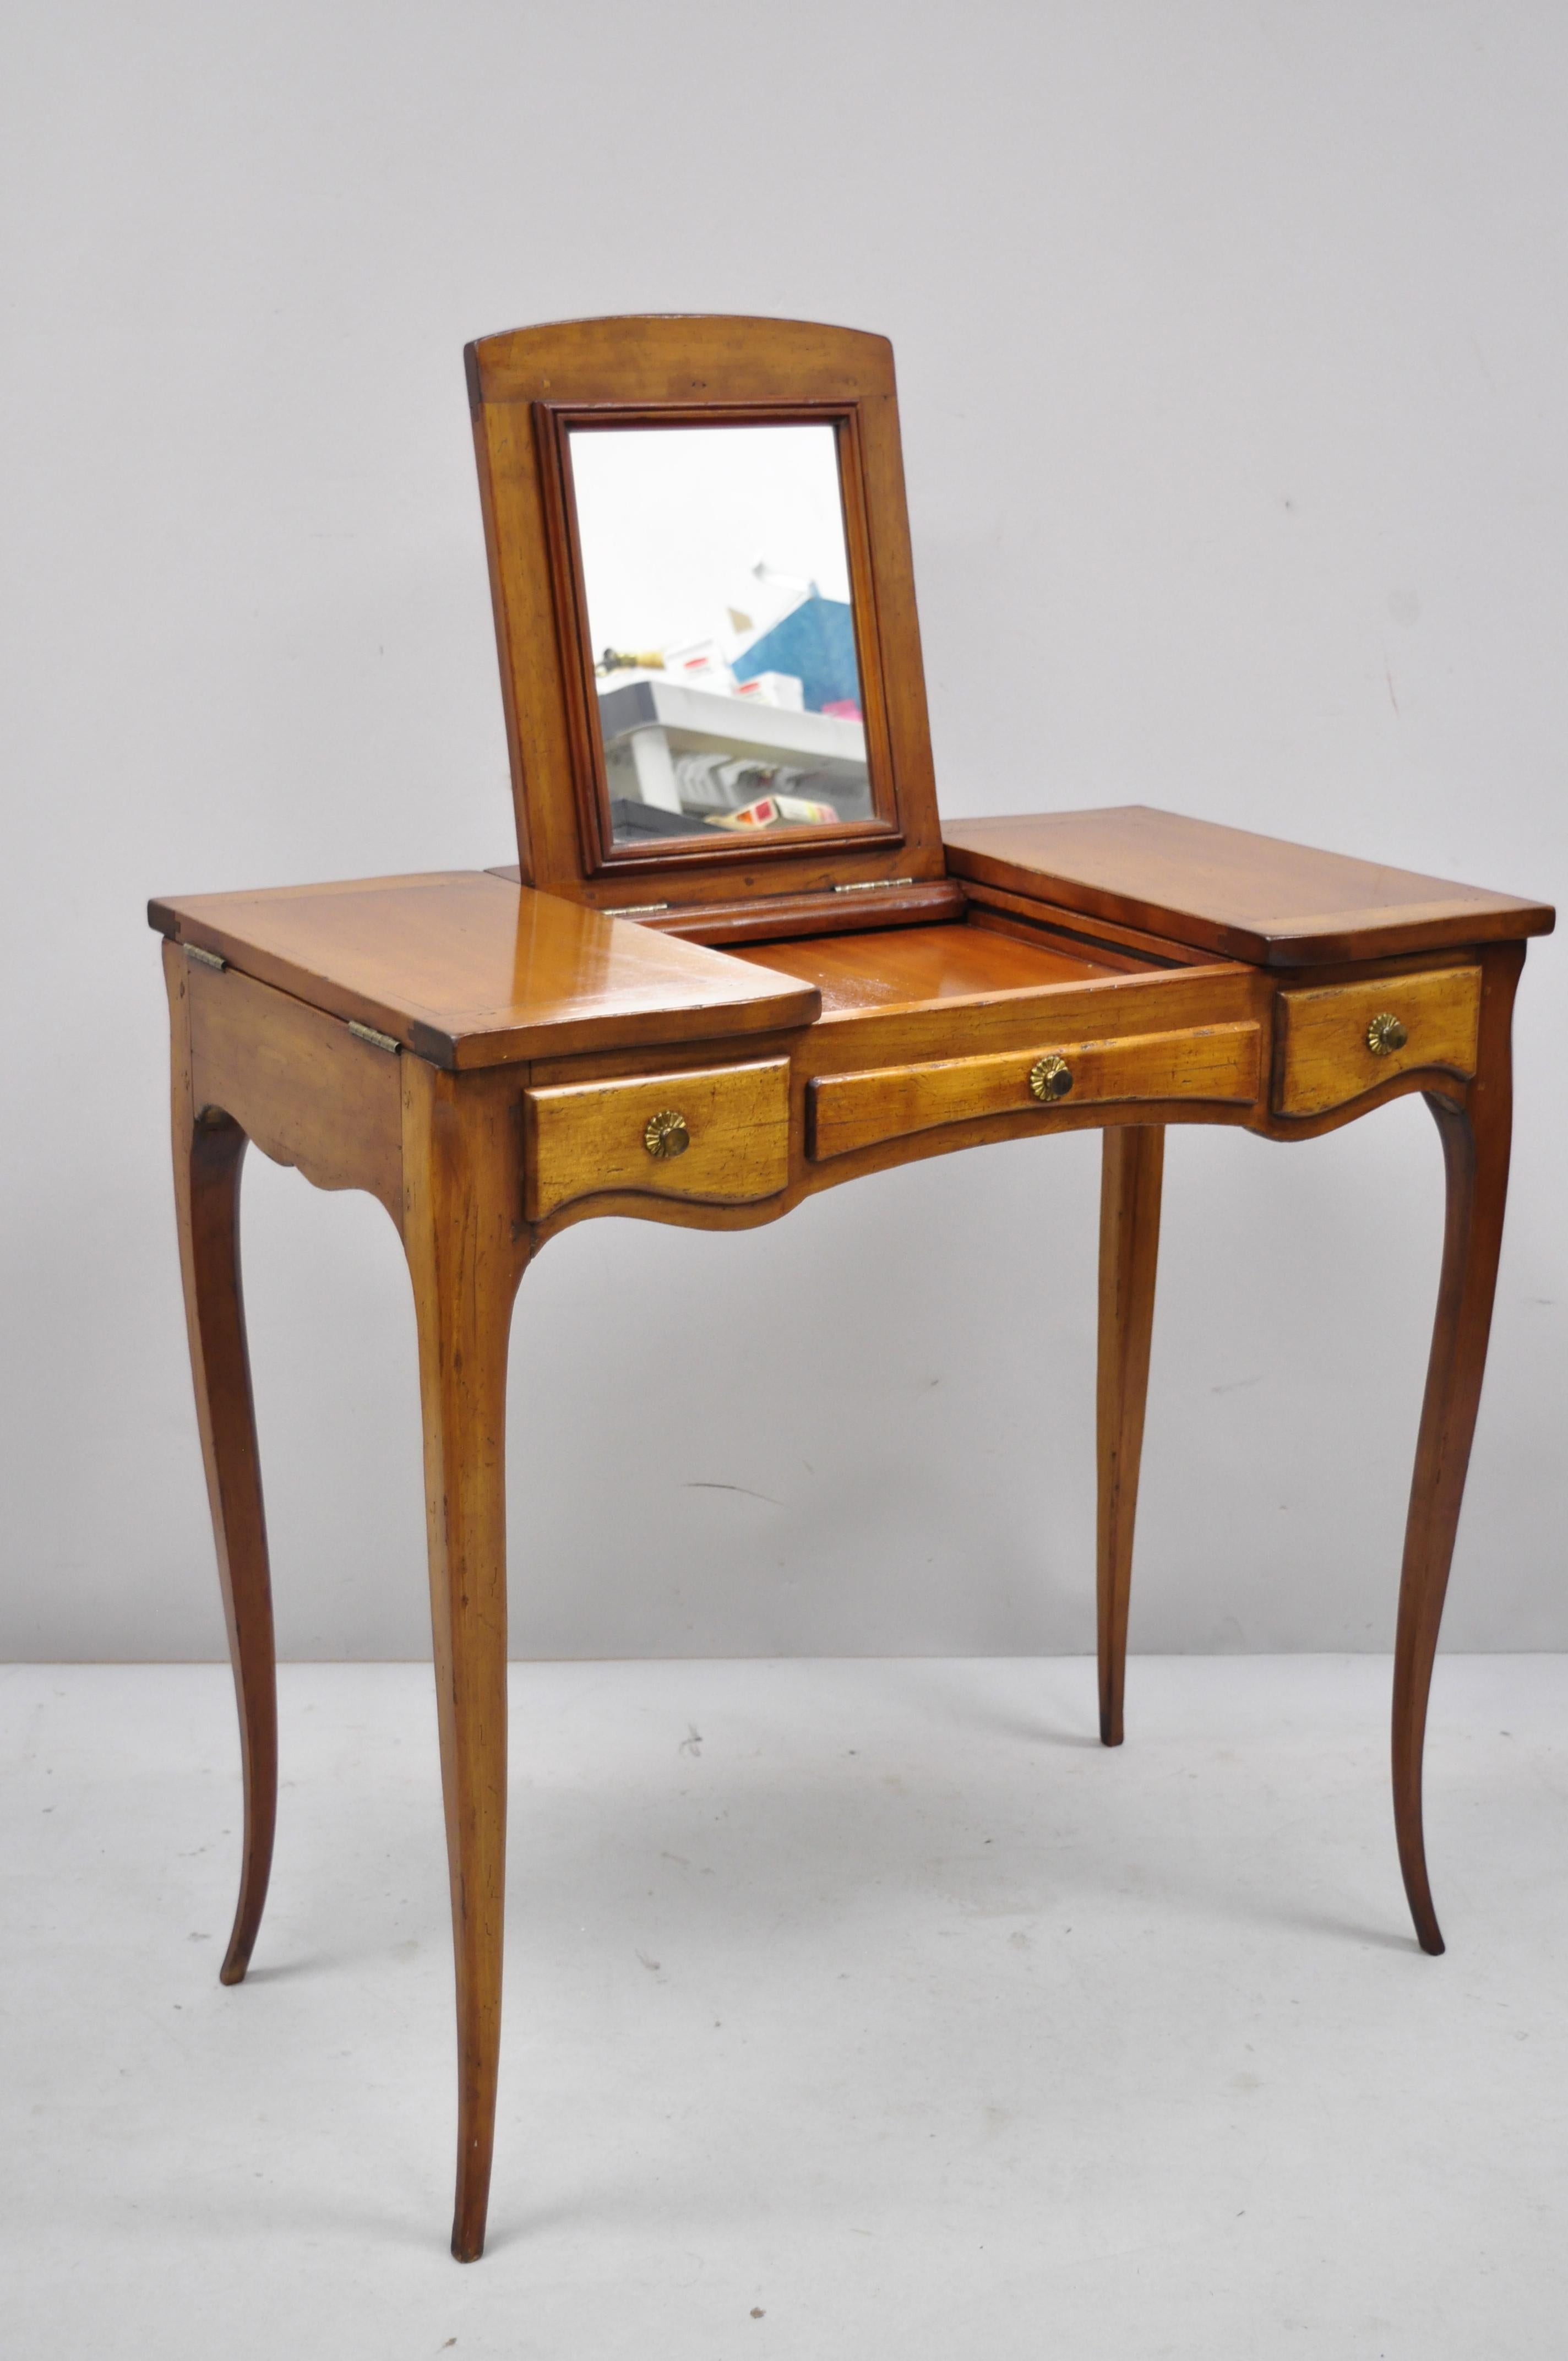 Antique French Country Provincial Petite Flip Mirror Top Vanity Dressing Table 1